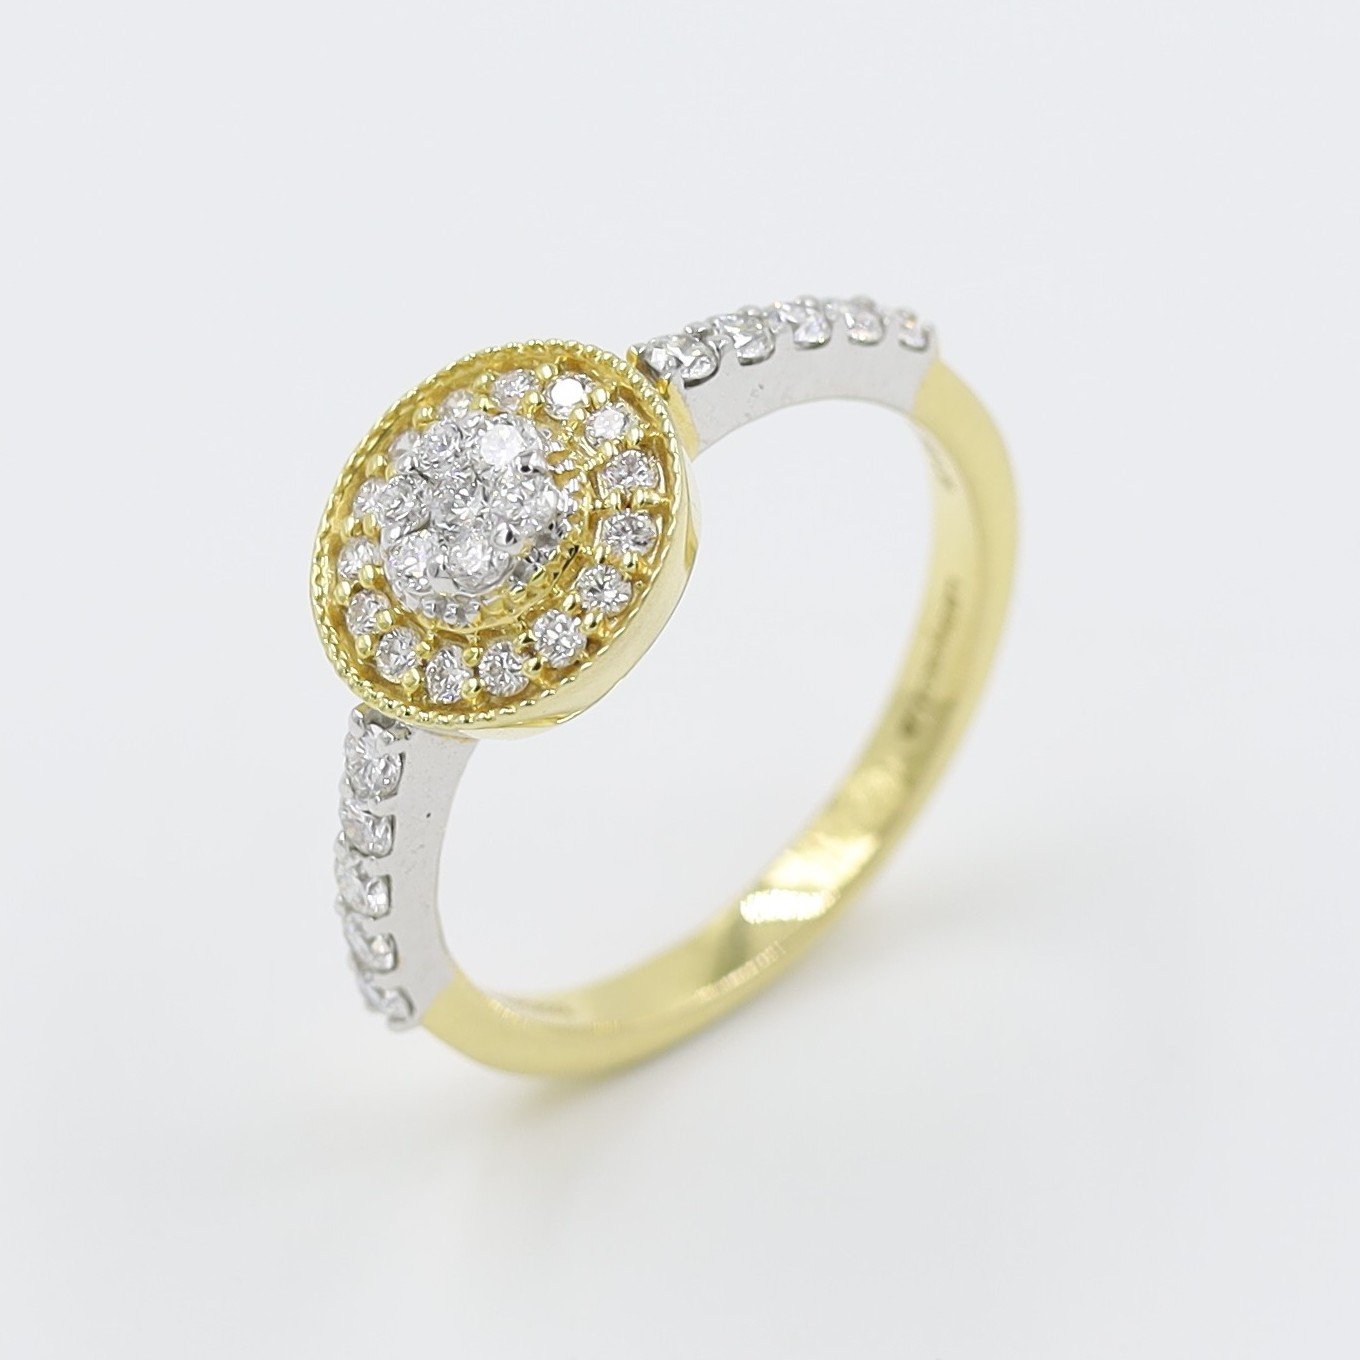 14Kt Yellow Gold Ring With Pressure Setting Diamons On Top